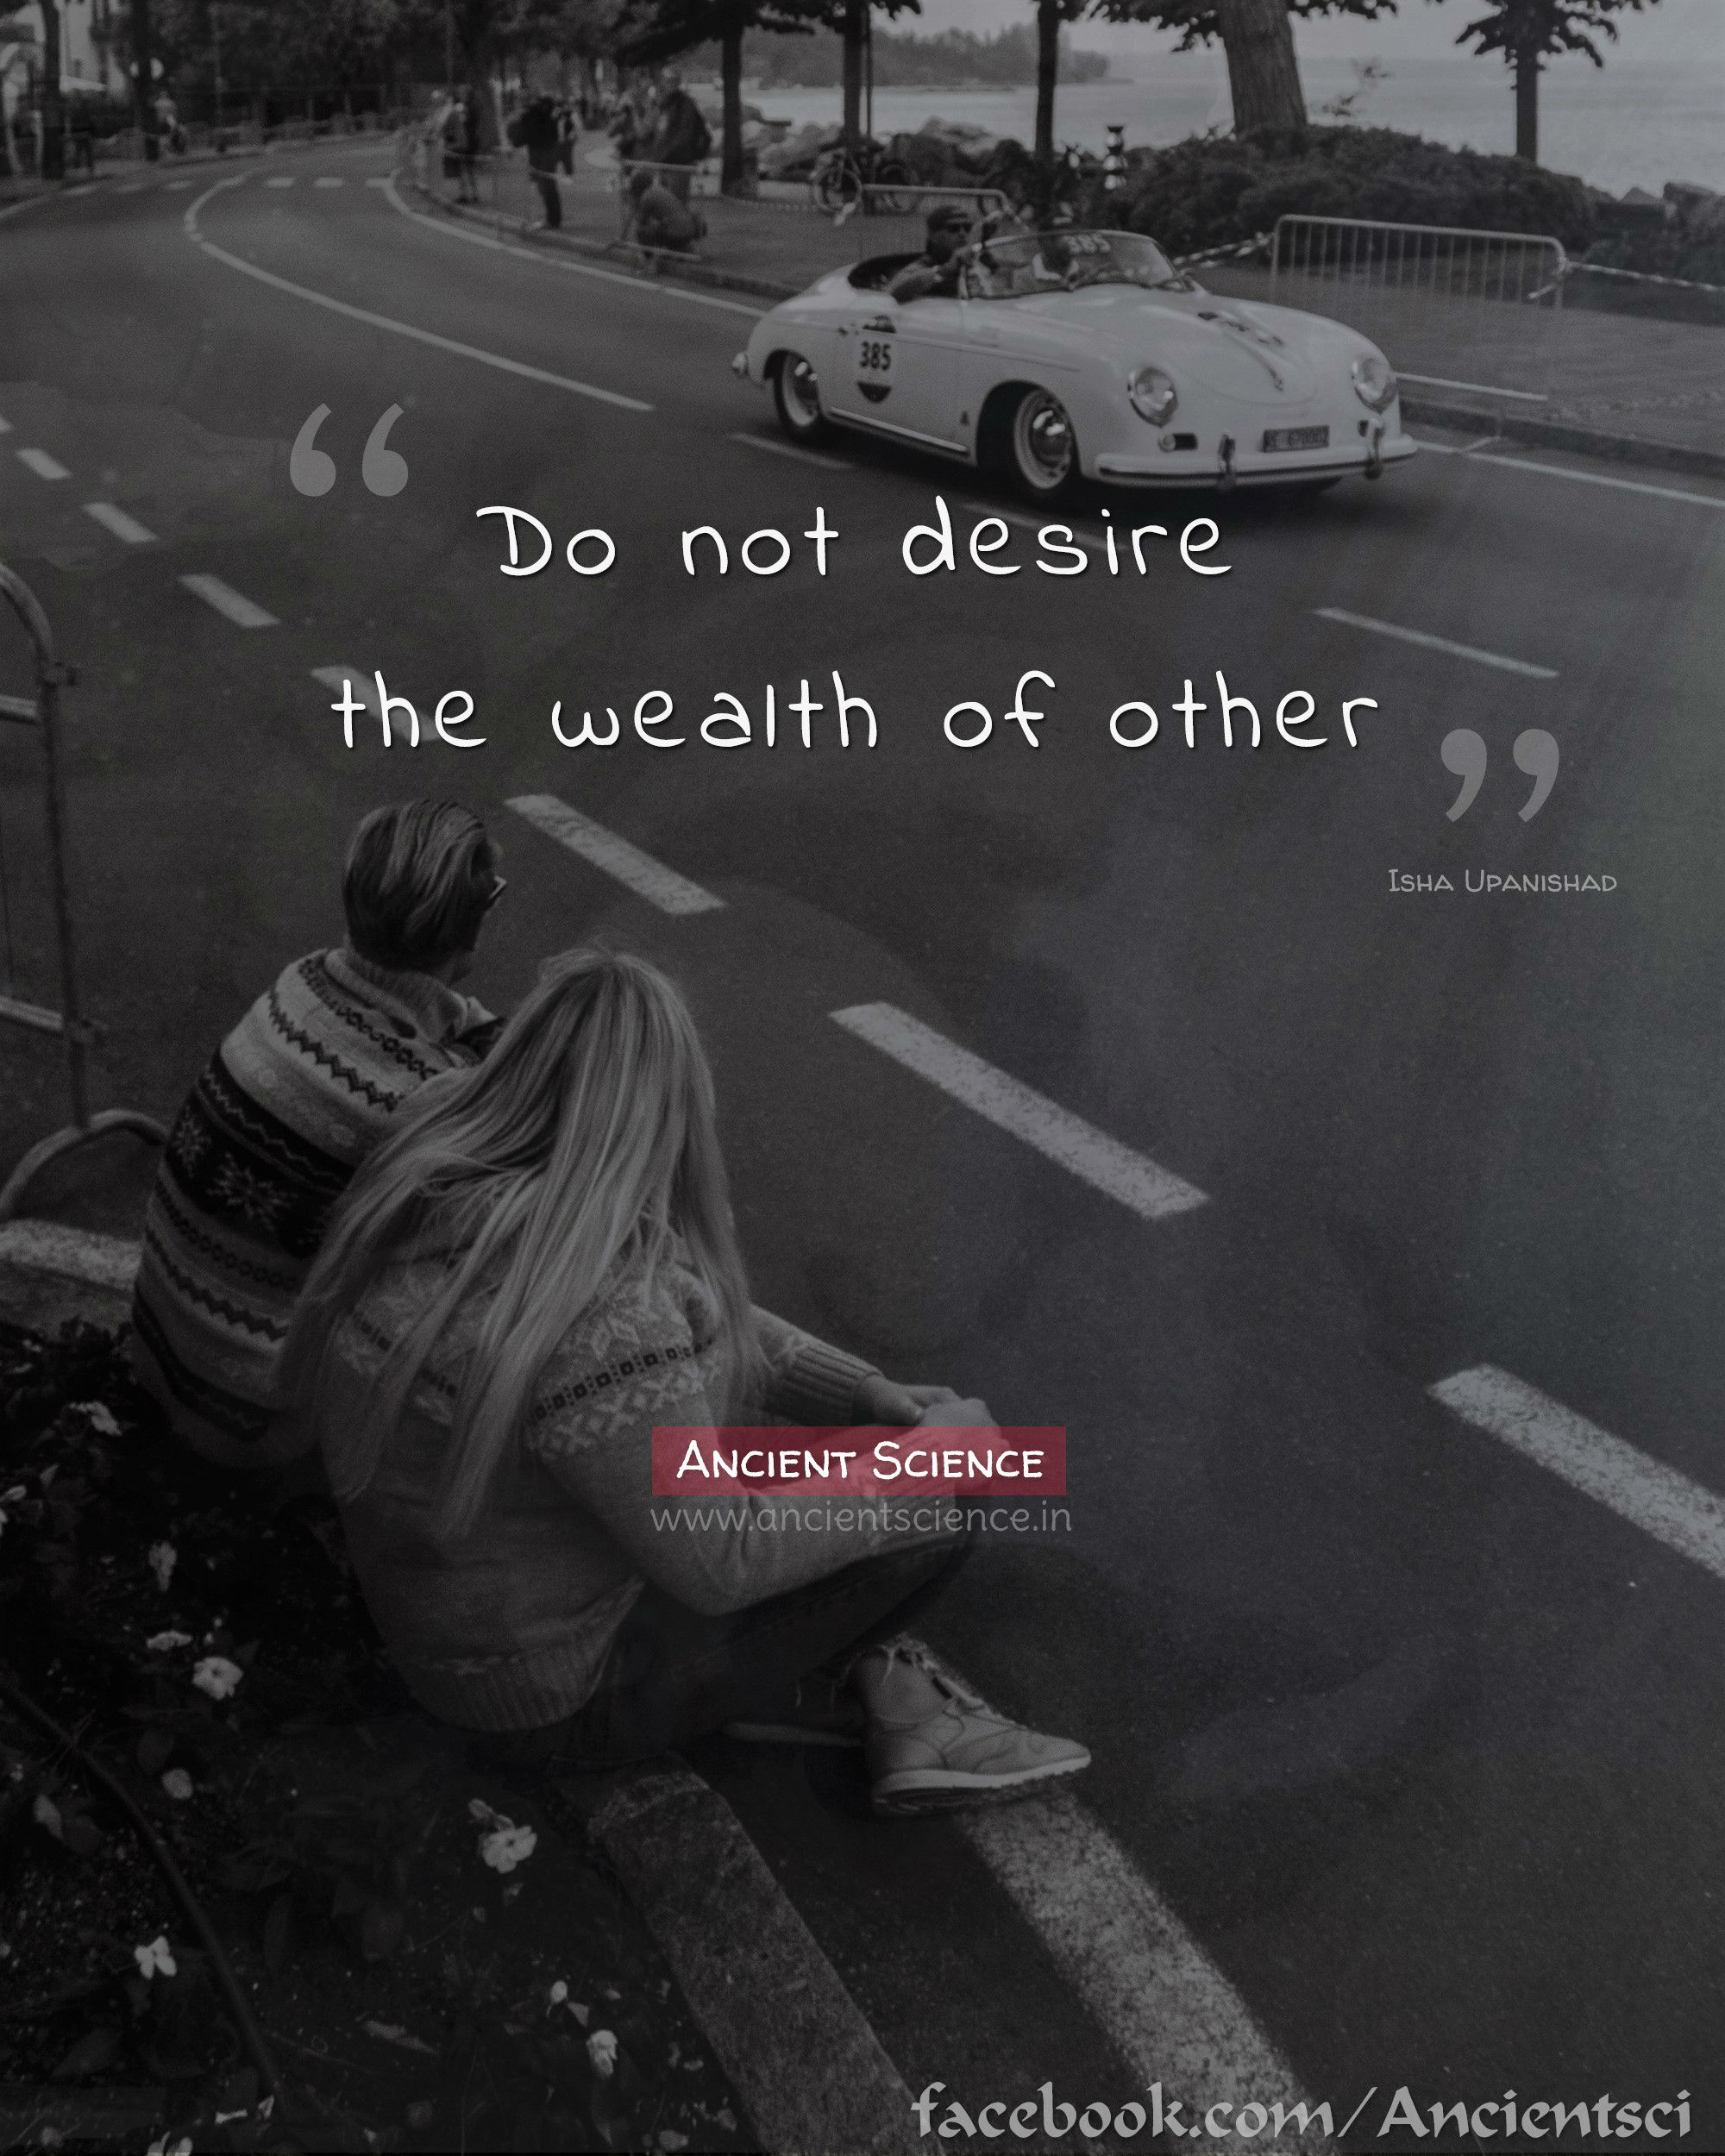 Do not desire the wealth of others.